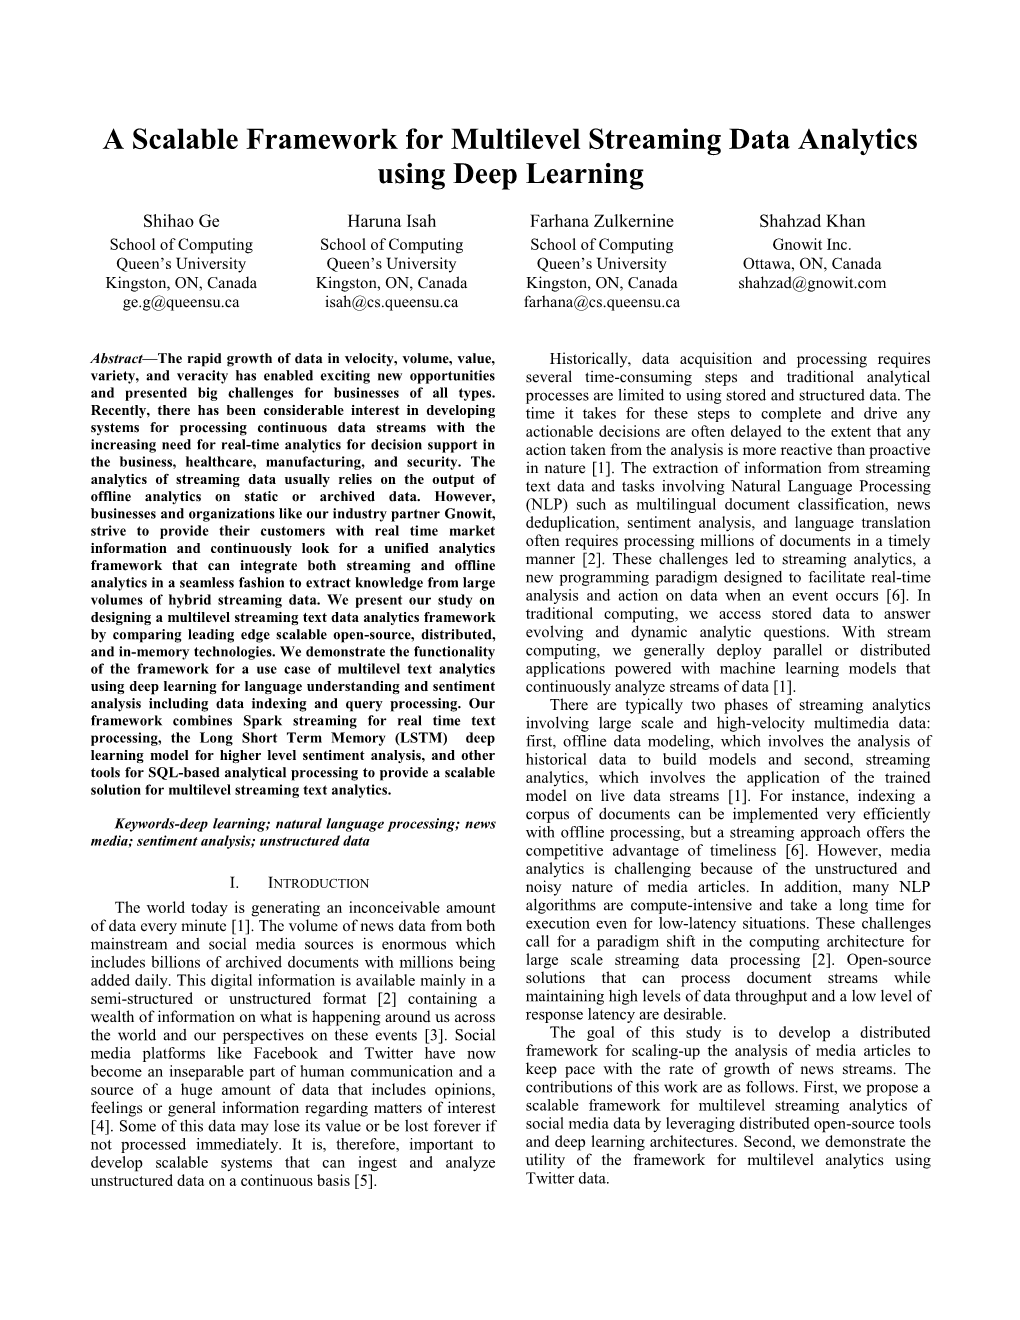 A Scalable Framework for Multilevel Streaming Data Analytics Using Deep Learning